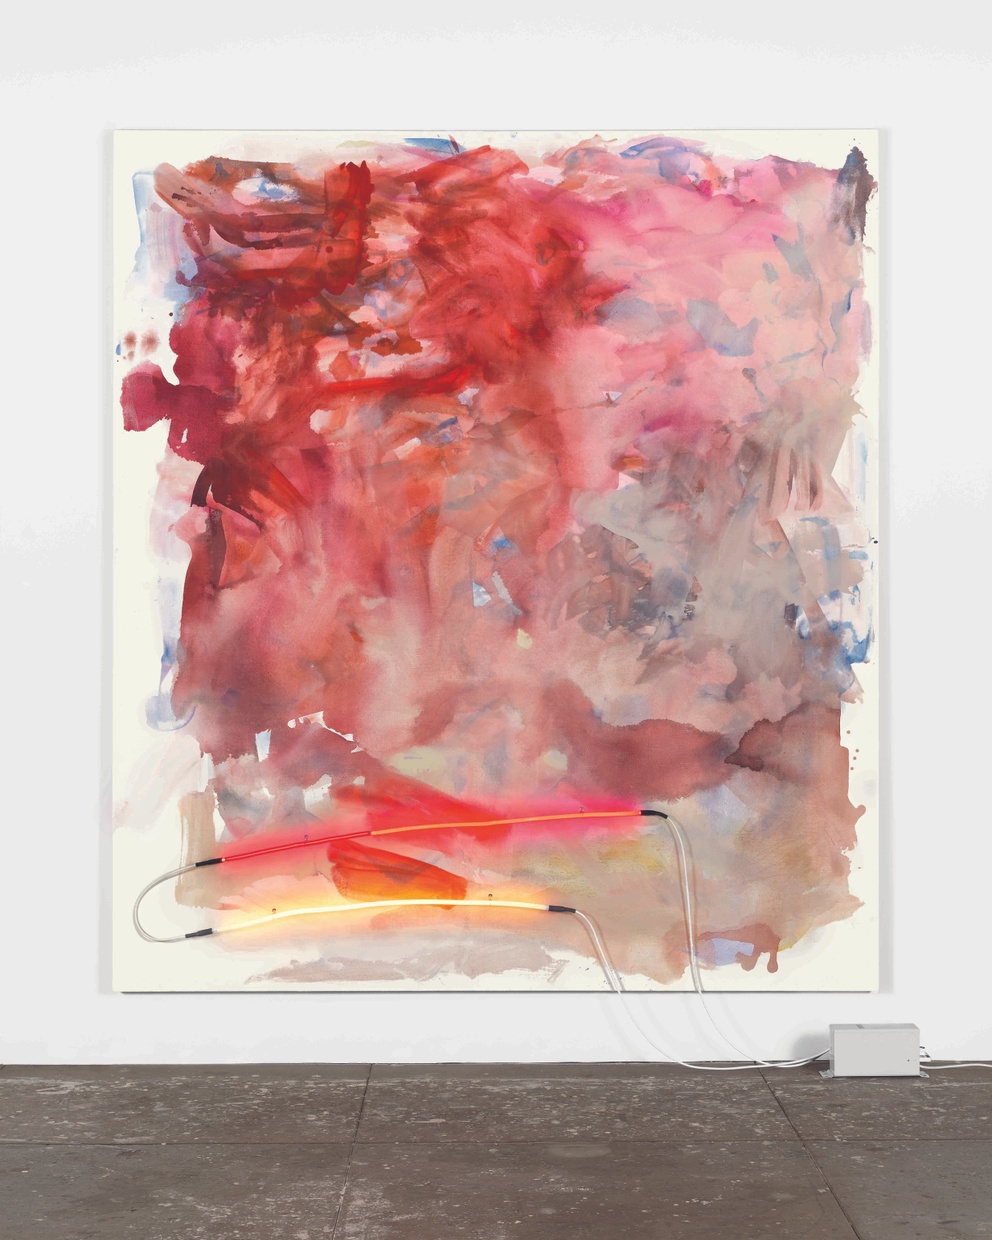 A large, abstract red painting with a yellow neon tube attached on the bottom left.